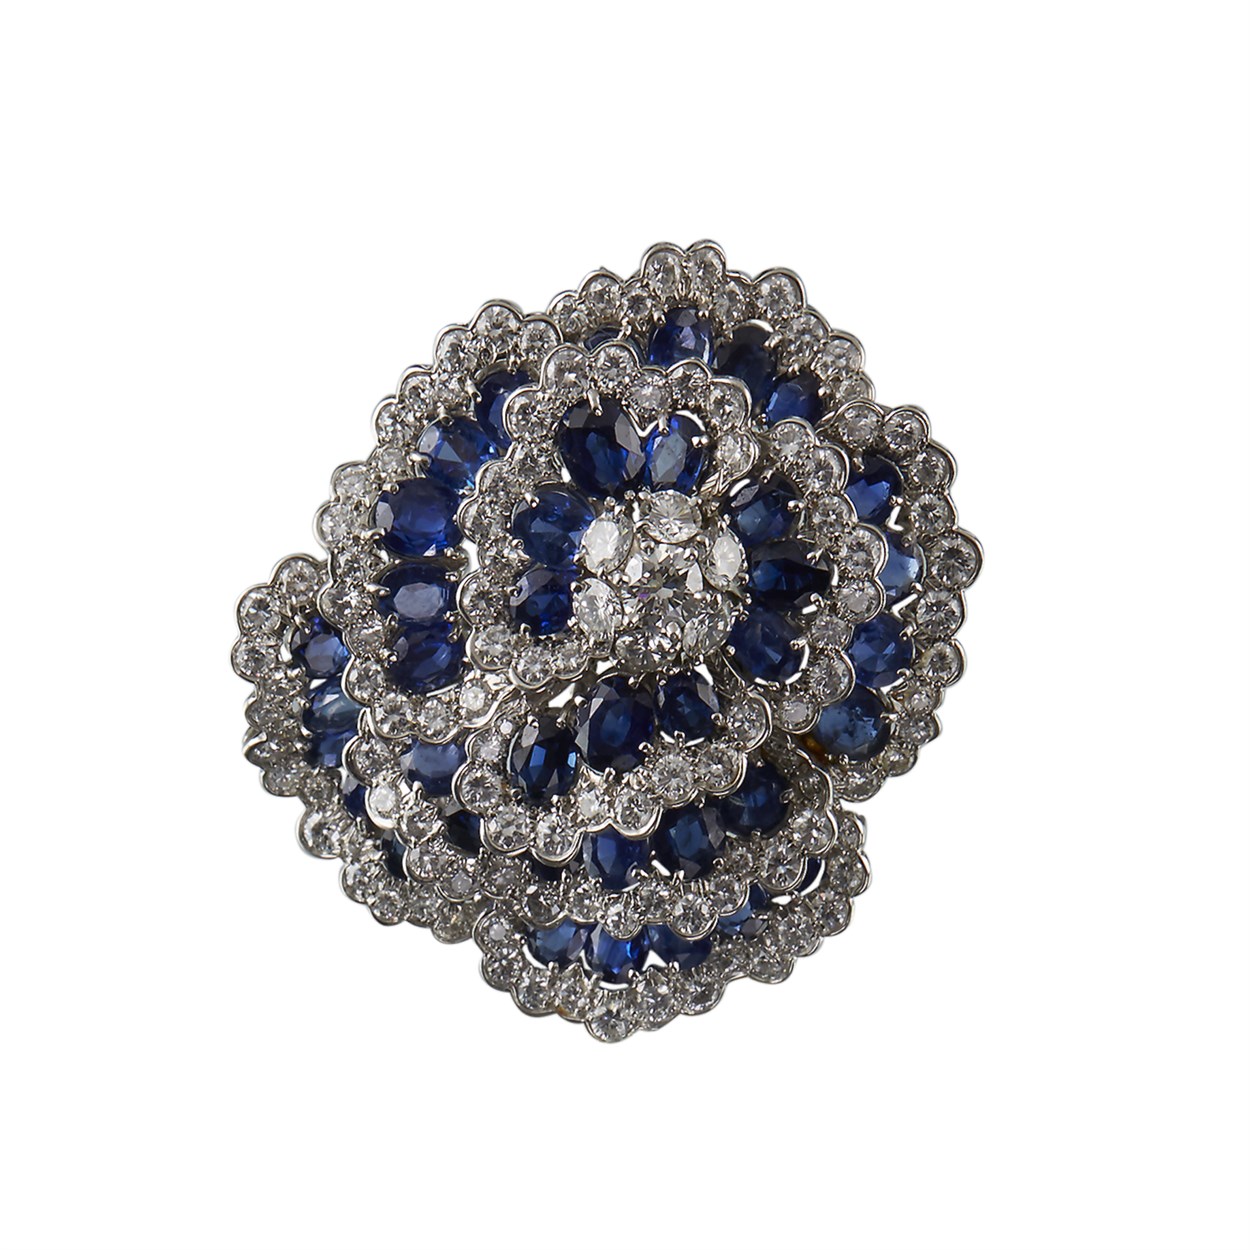 Lot 147 - A sapphire and diamond "Camellia" brooch, Van Cleef and Arpels